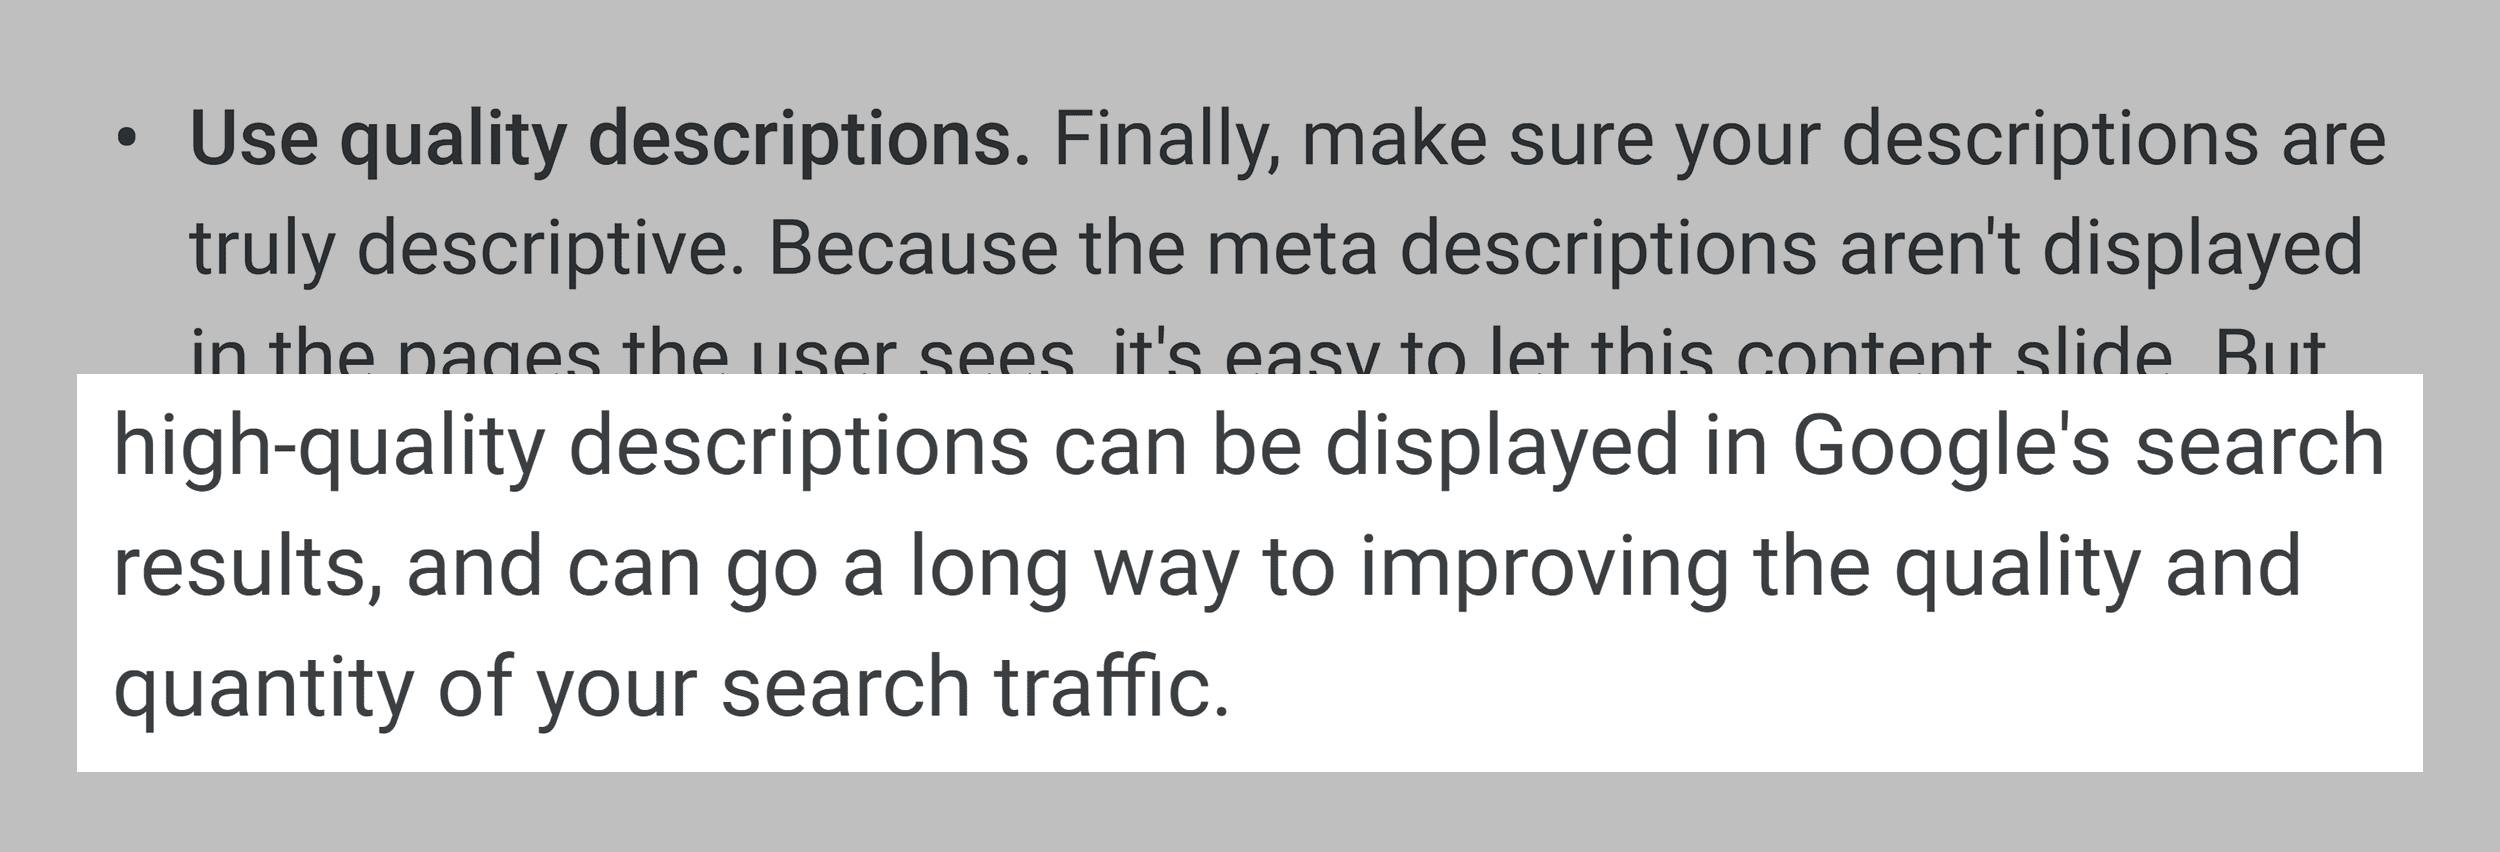 Google Suggests Well Written Descriptions Can Improve Clicks From SERPs